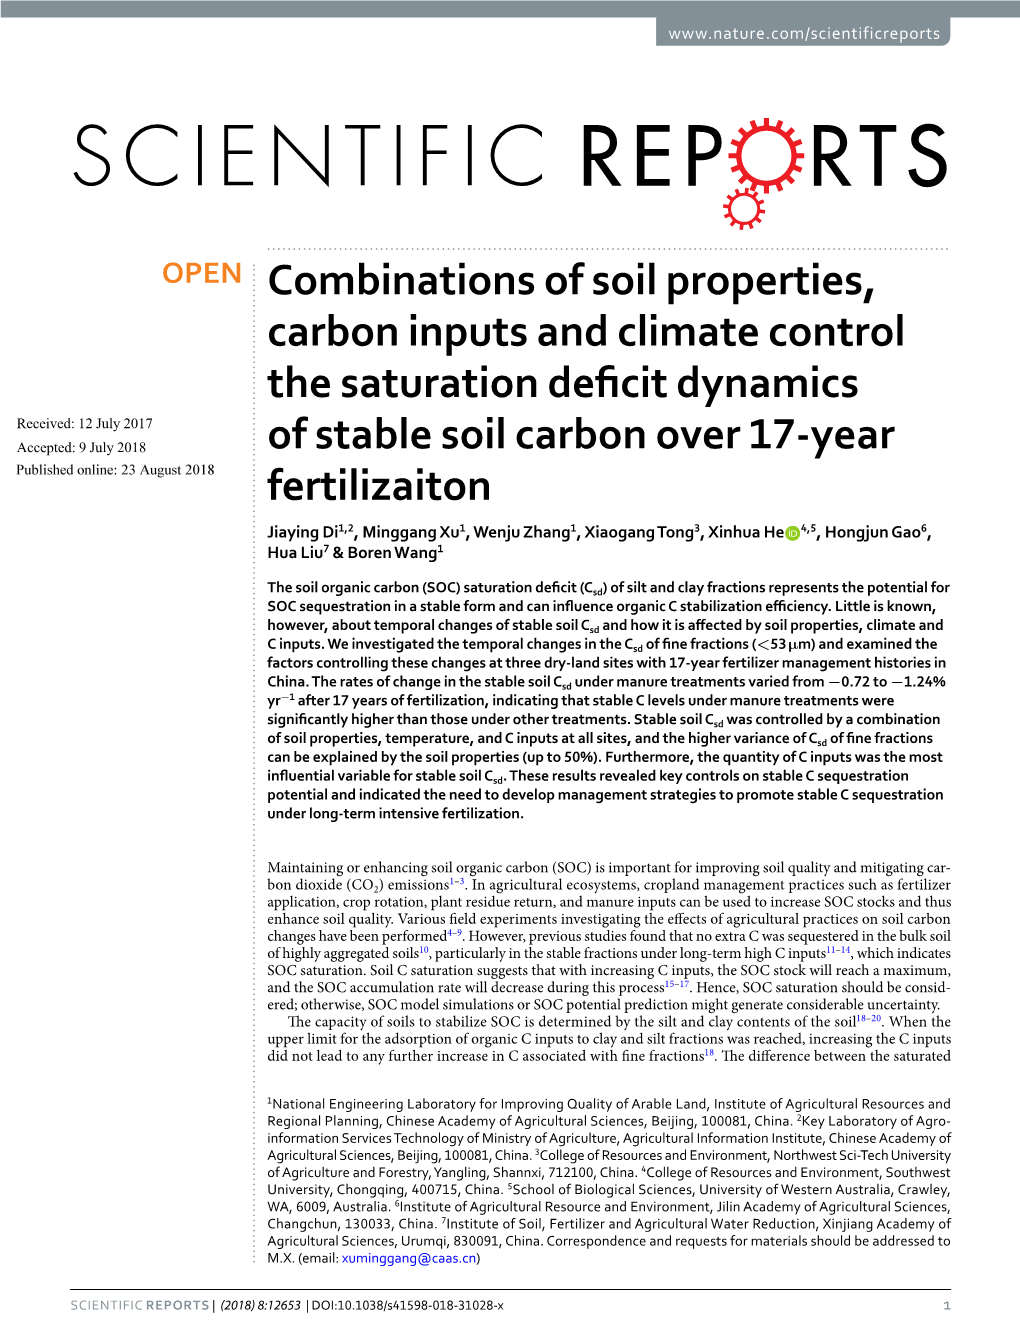 Combinations of Soil Properties, Carbon Inputs and Climate Control